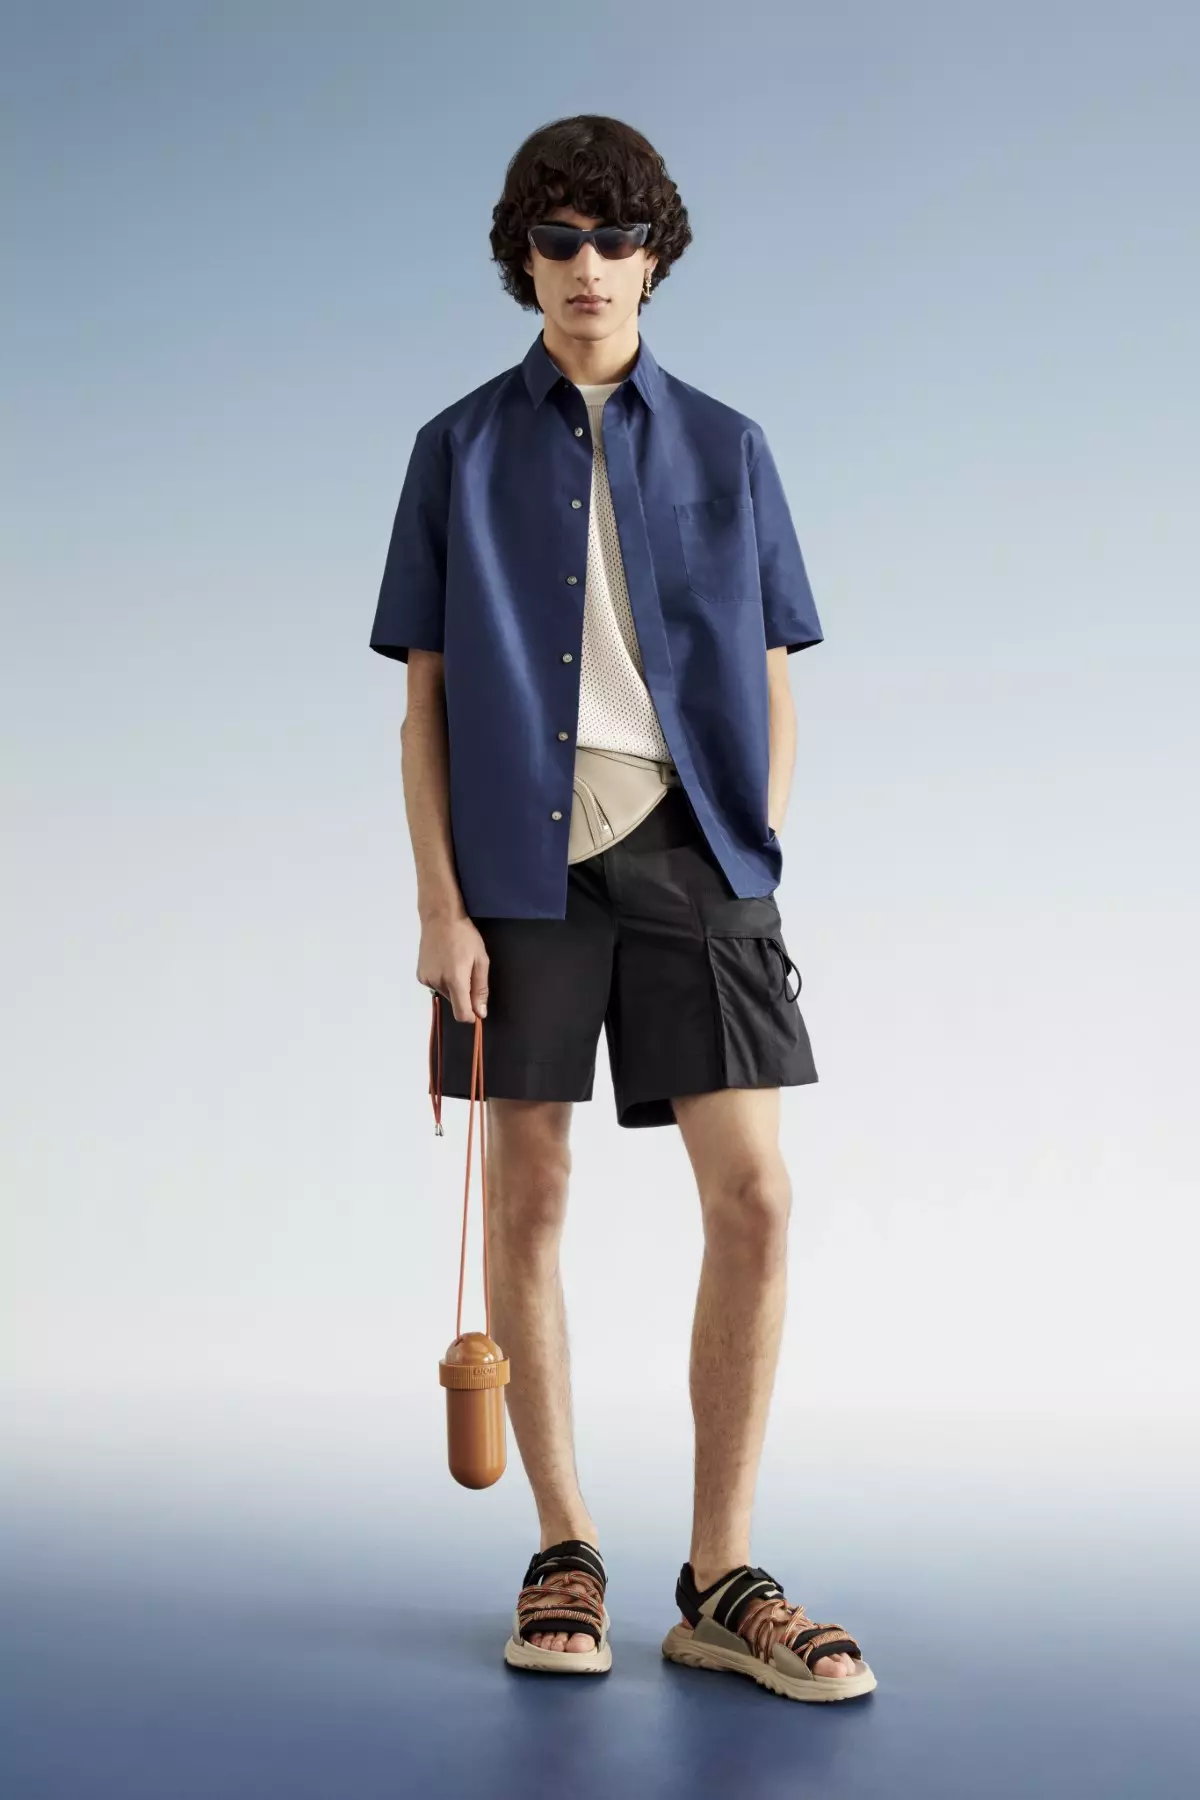 Dior Men and Parley for the Oceans join forces to unveil their eco-innovative beachwear capsule